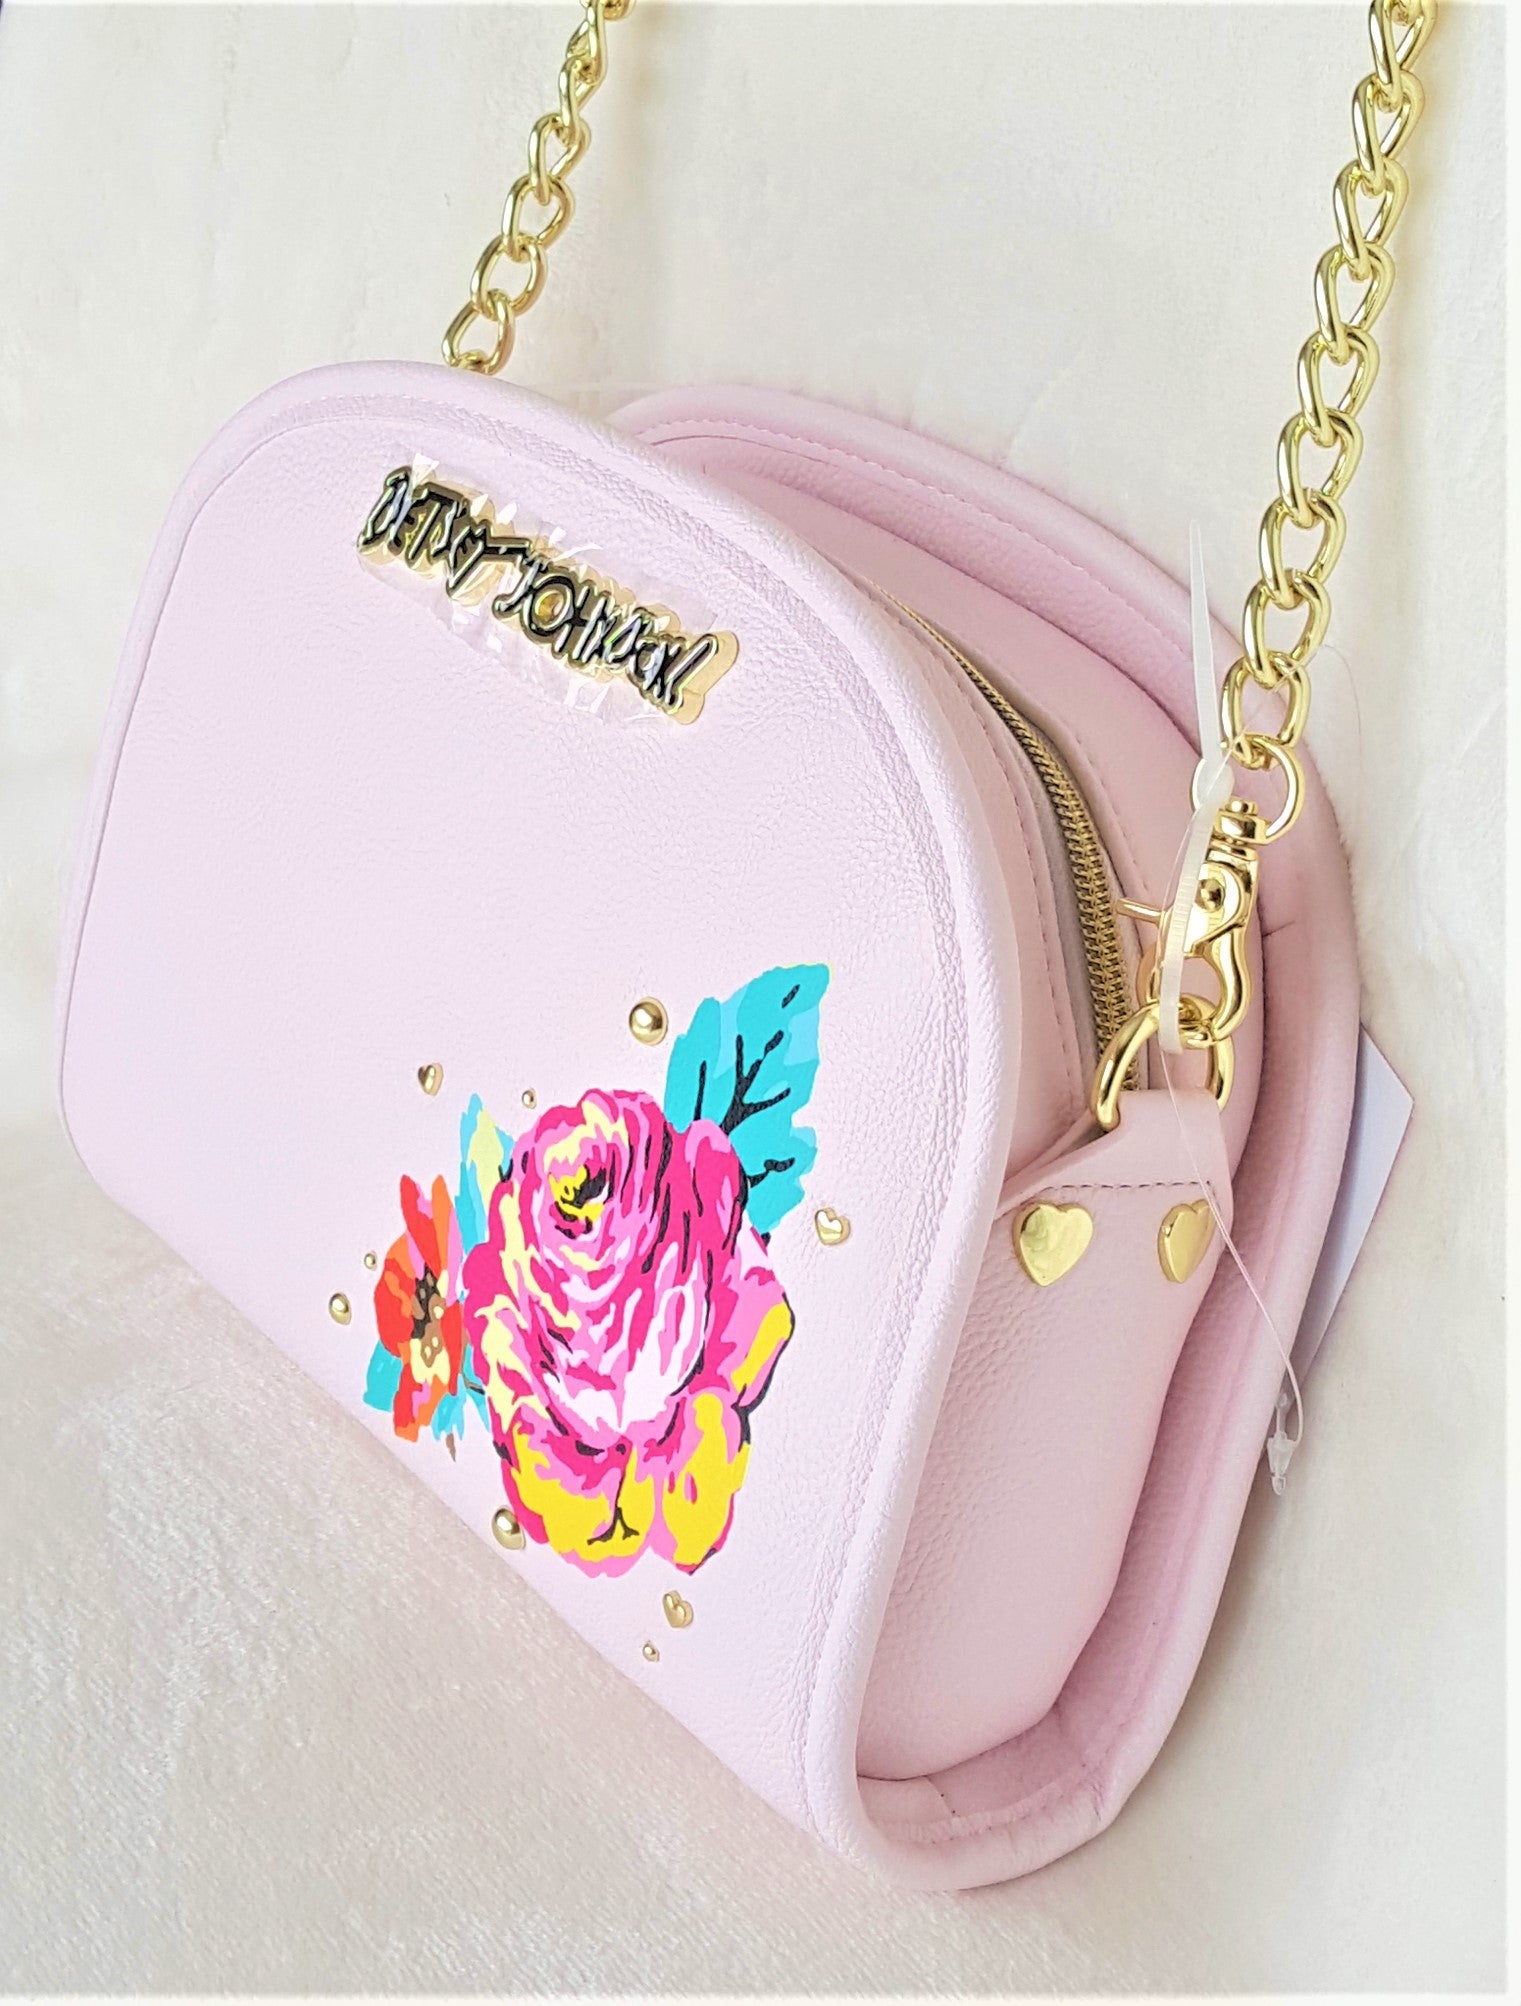 Betsey Johnson | Bags | Salebn Betsey Johnson Pink Quilted Purse | Poshmark